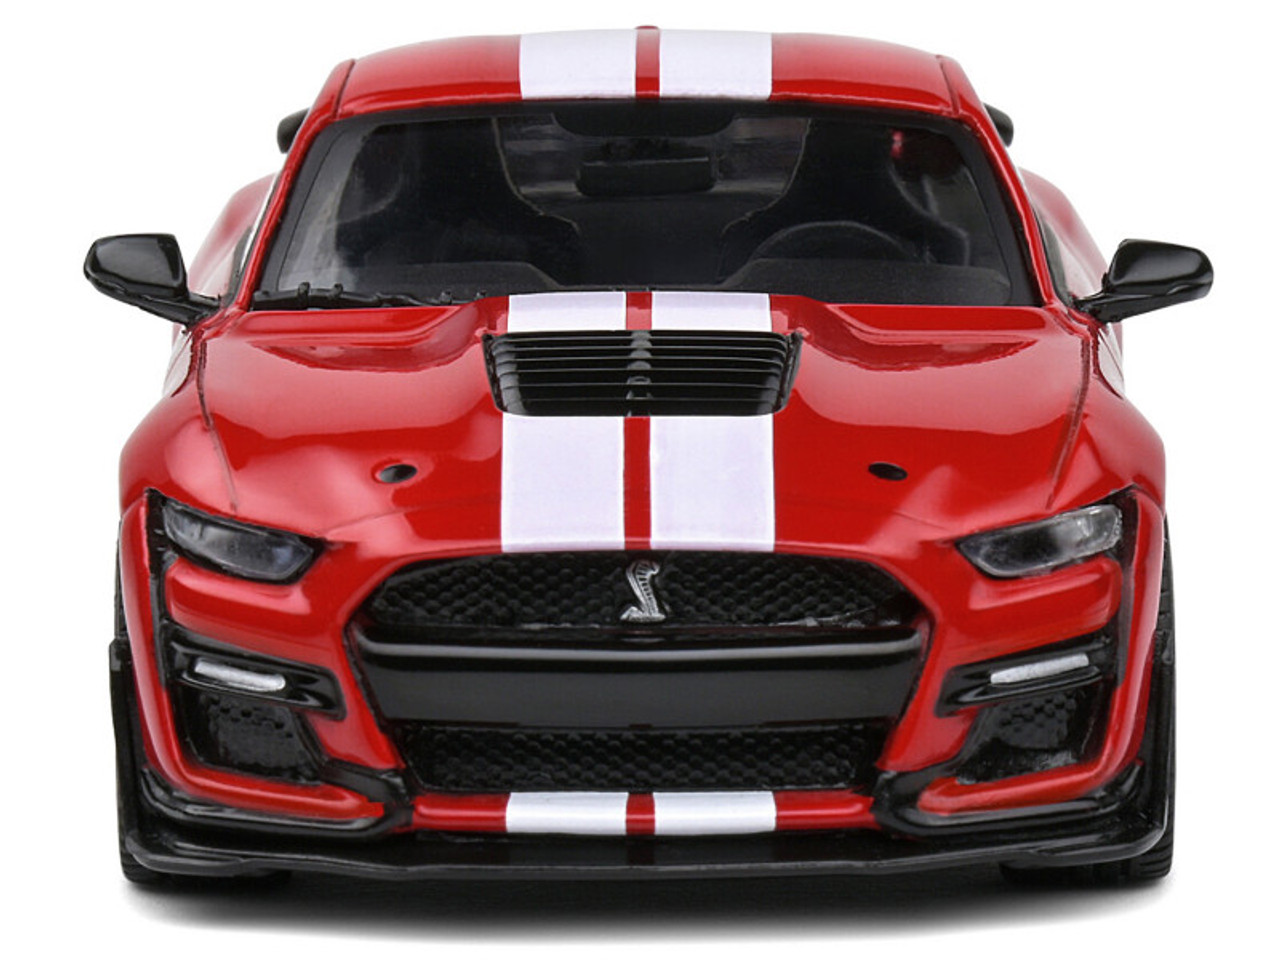 1/43 Solido 2022 Ford Mustang Shelby GT500 Fast Track (Racing Red) Diecast Car Model